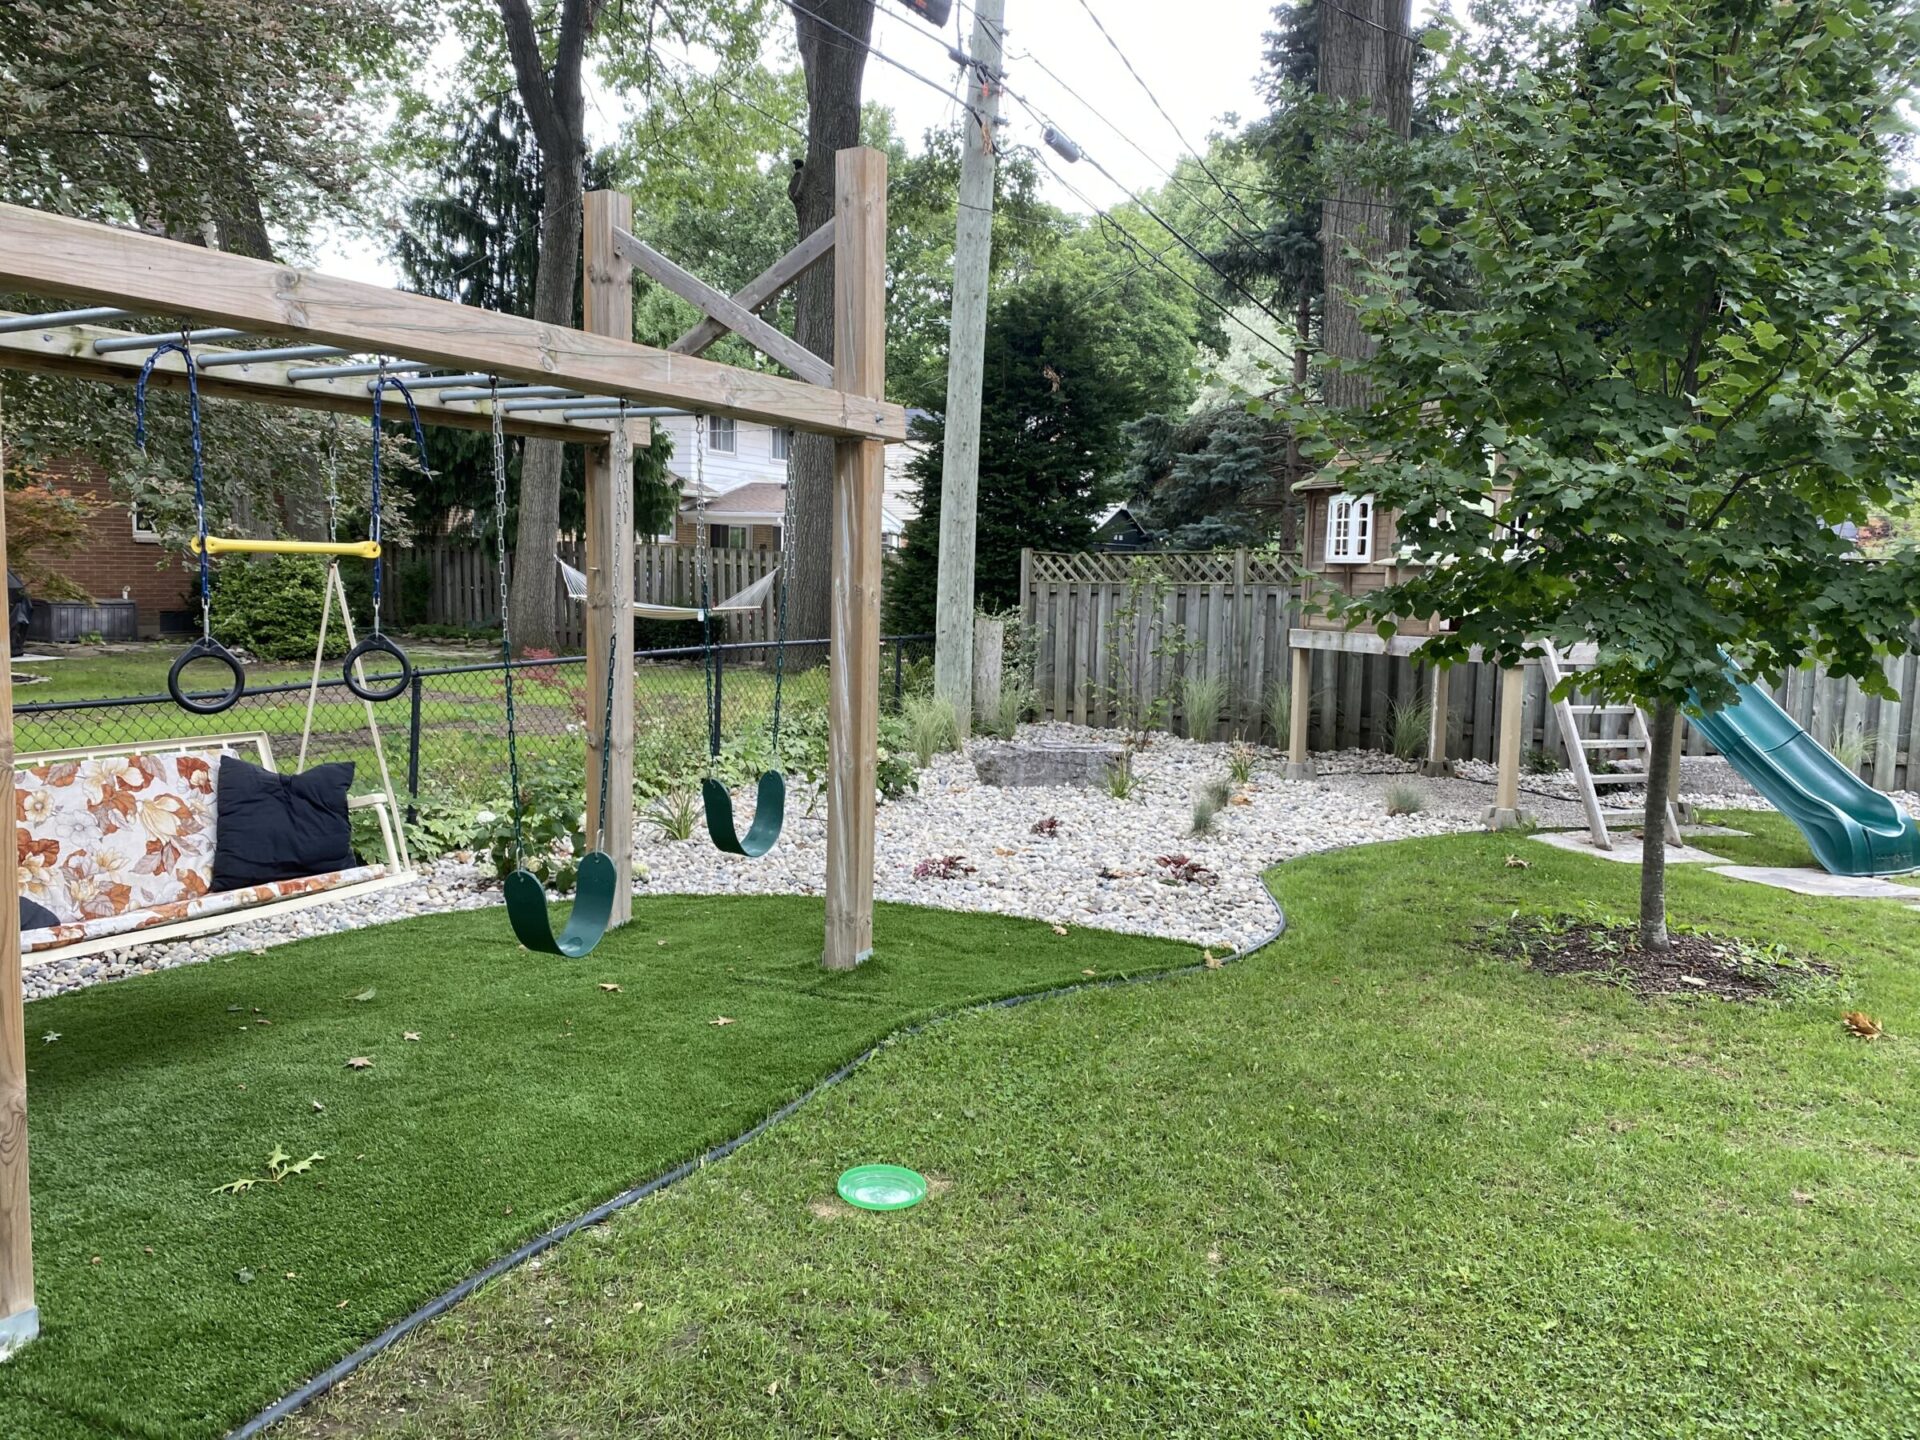 A backyard with artificial turf, a wooden swing set, a slide, trees, rocks, a bench with cushions, and a small, decorative fence.